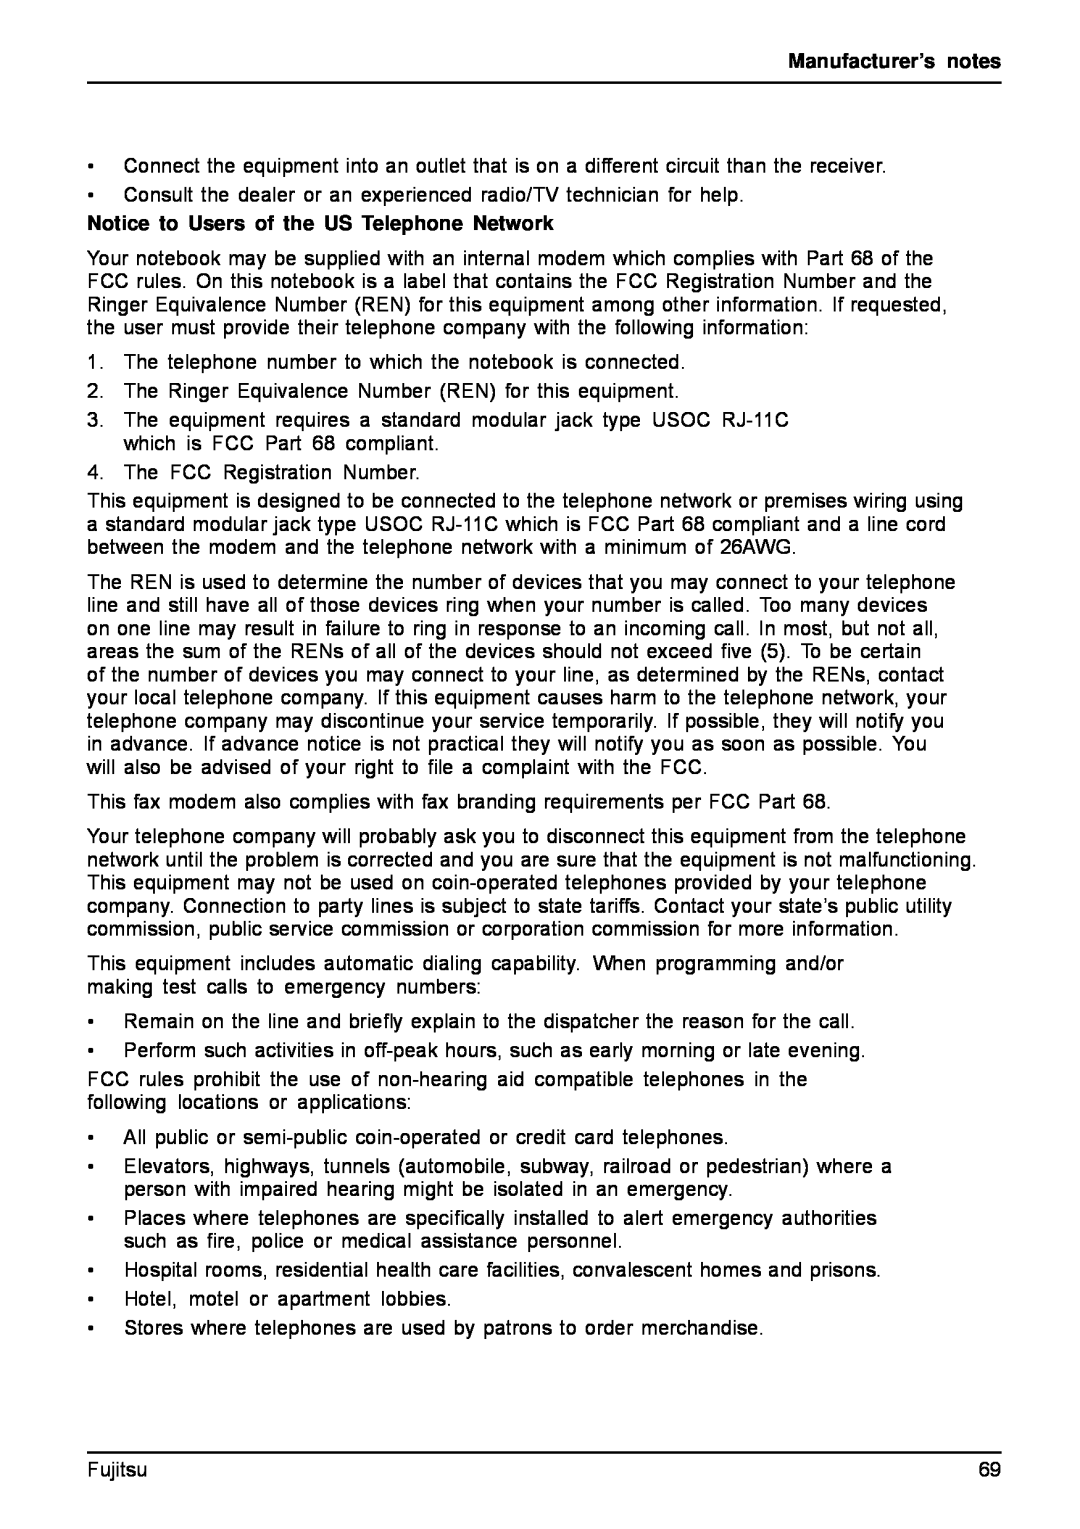 Fujitsu A512, AH512 manual Manufacturer’s notes, Notice to Users of the US Telephone Network 